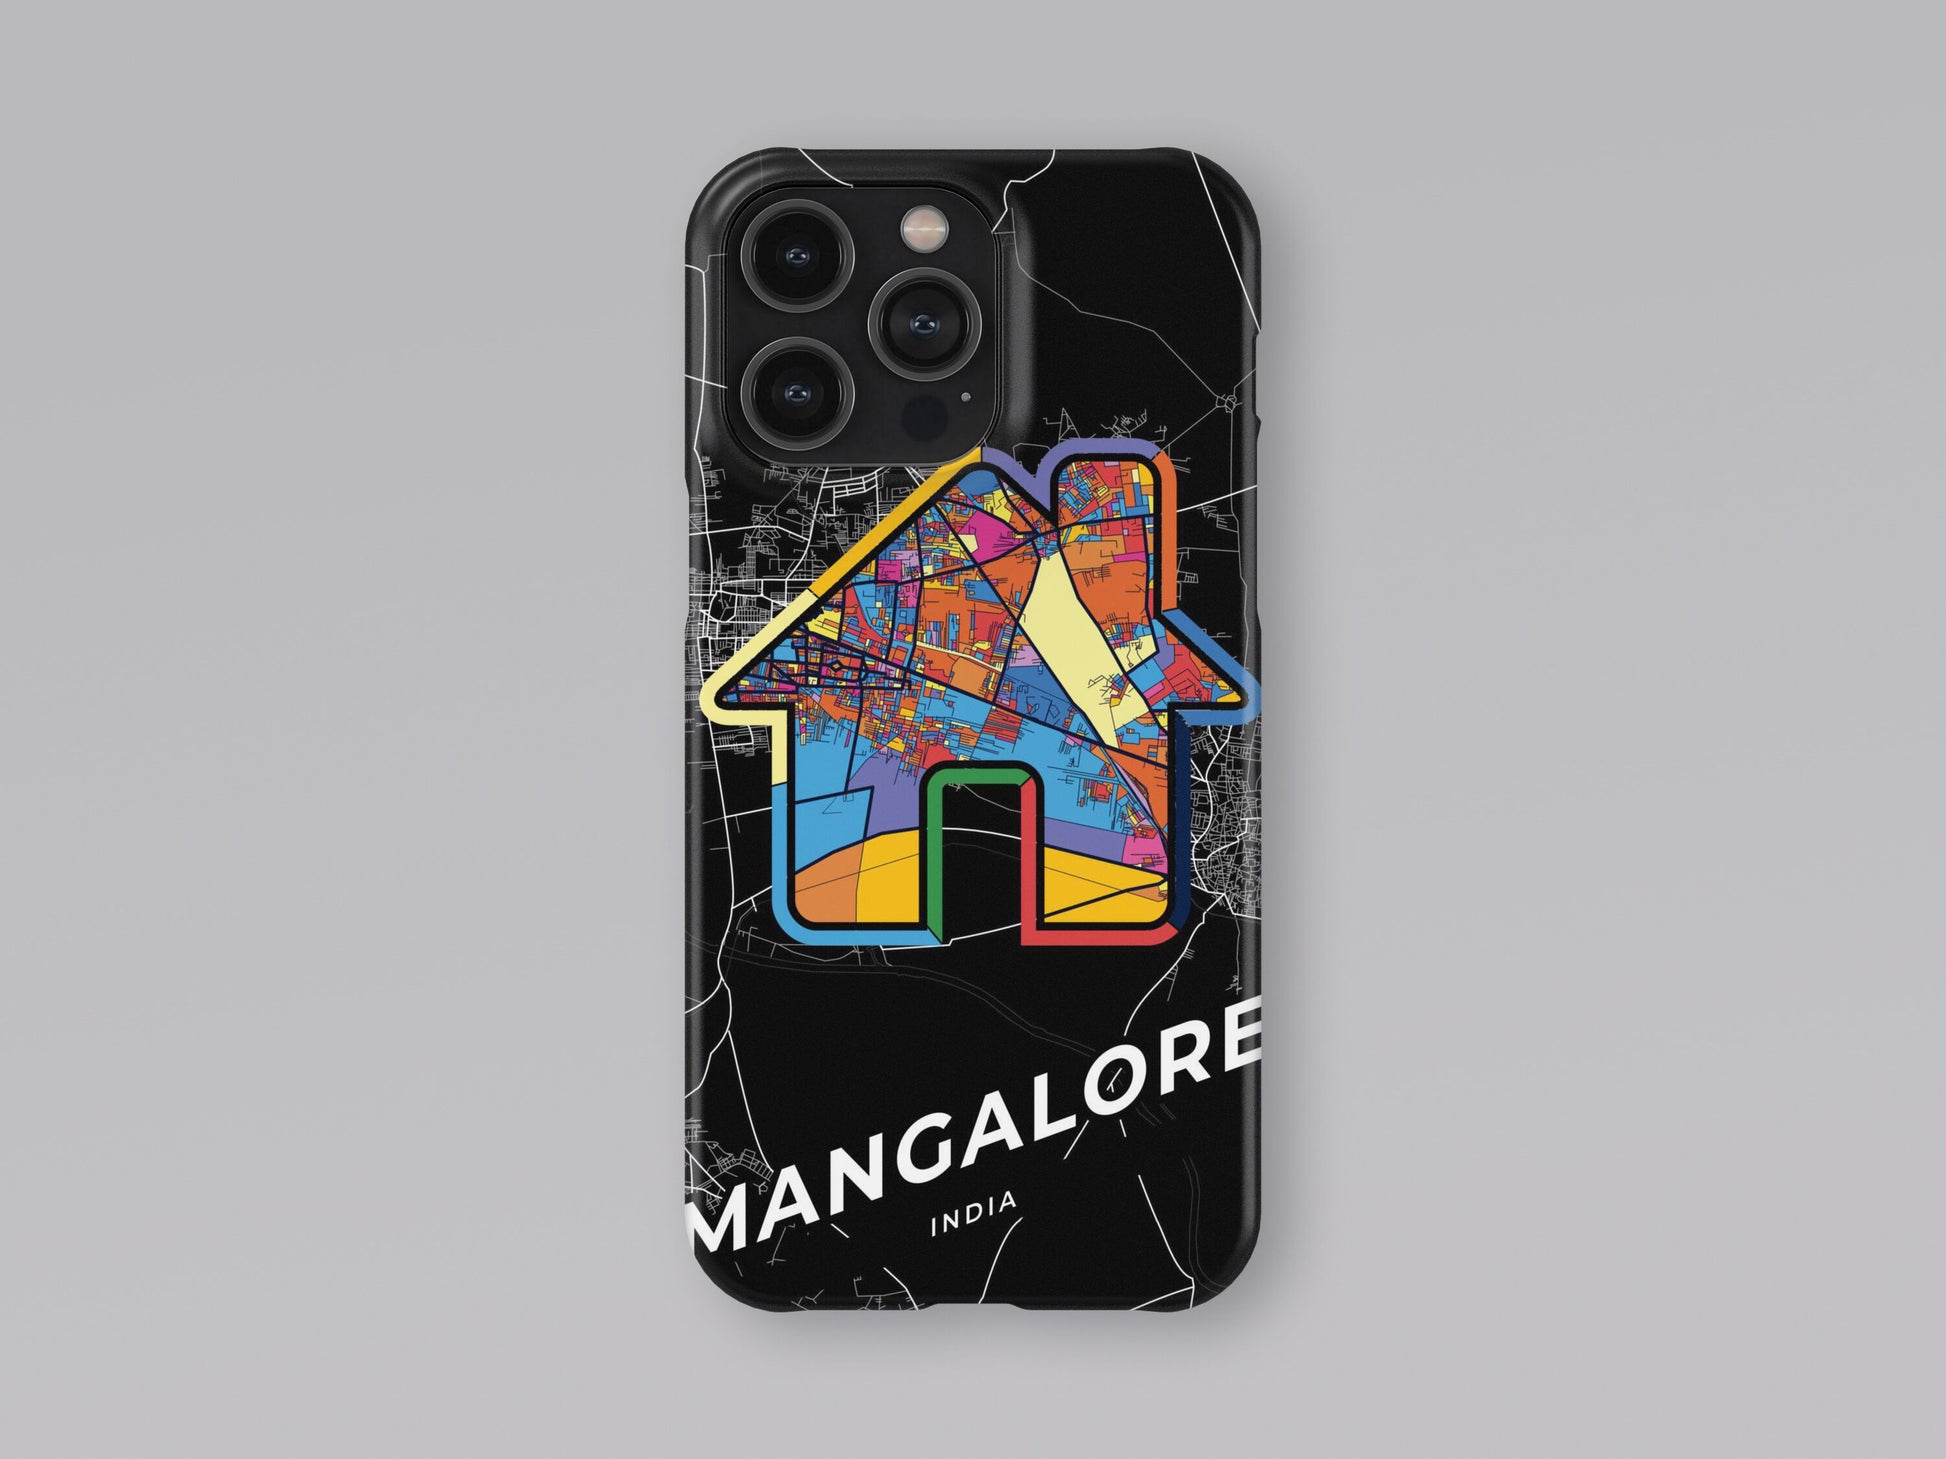 Mangalore India slim phone case with colorful icon. Birthday, wedding or housewarming gift. Couple match cases. 3